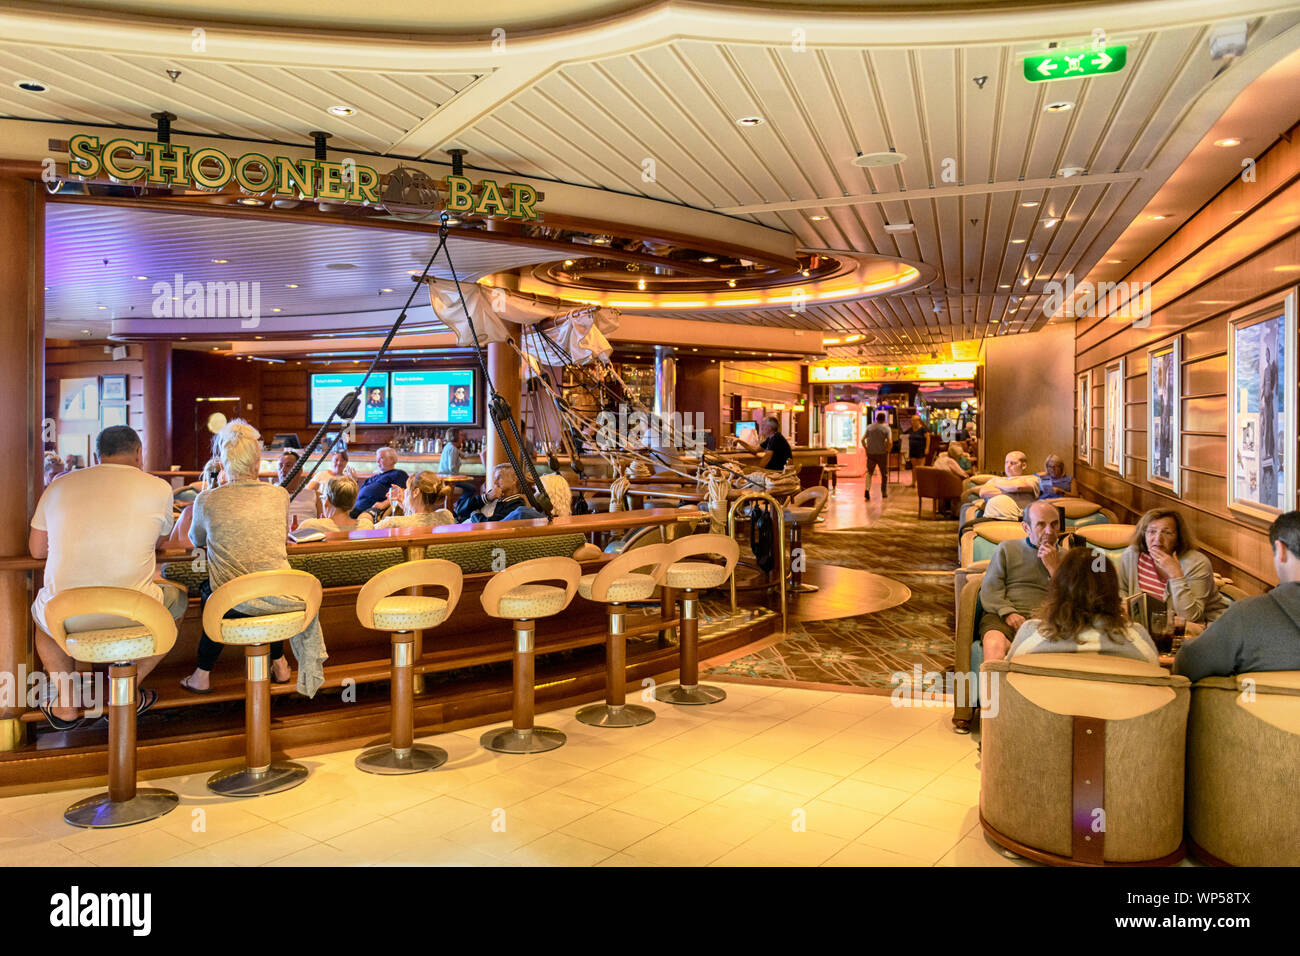 Independence of the seas interior inside Schooner bar entertainment social drinking area onboard Royal Caribbean cruise ship Independence of the seas Stock Photo